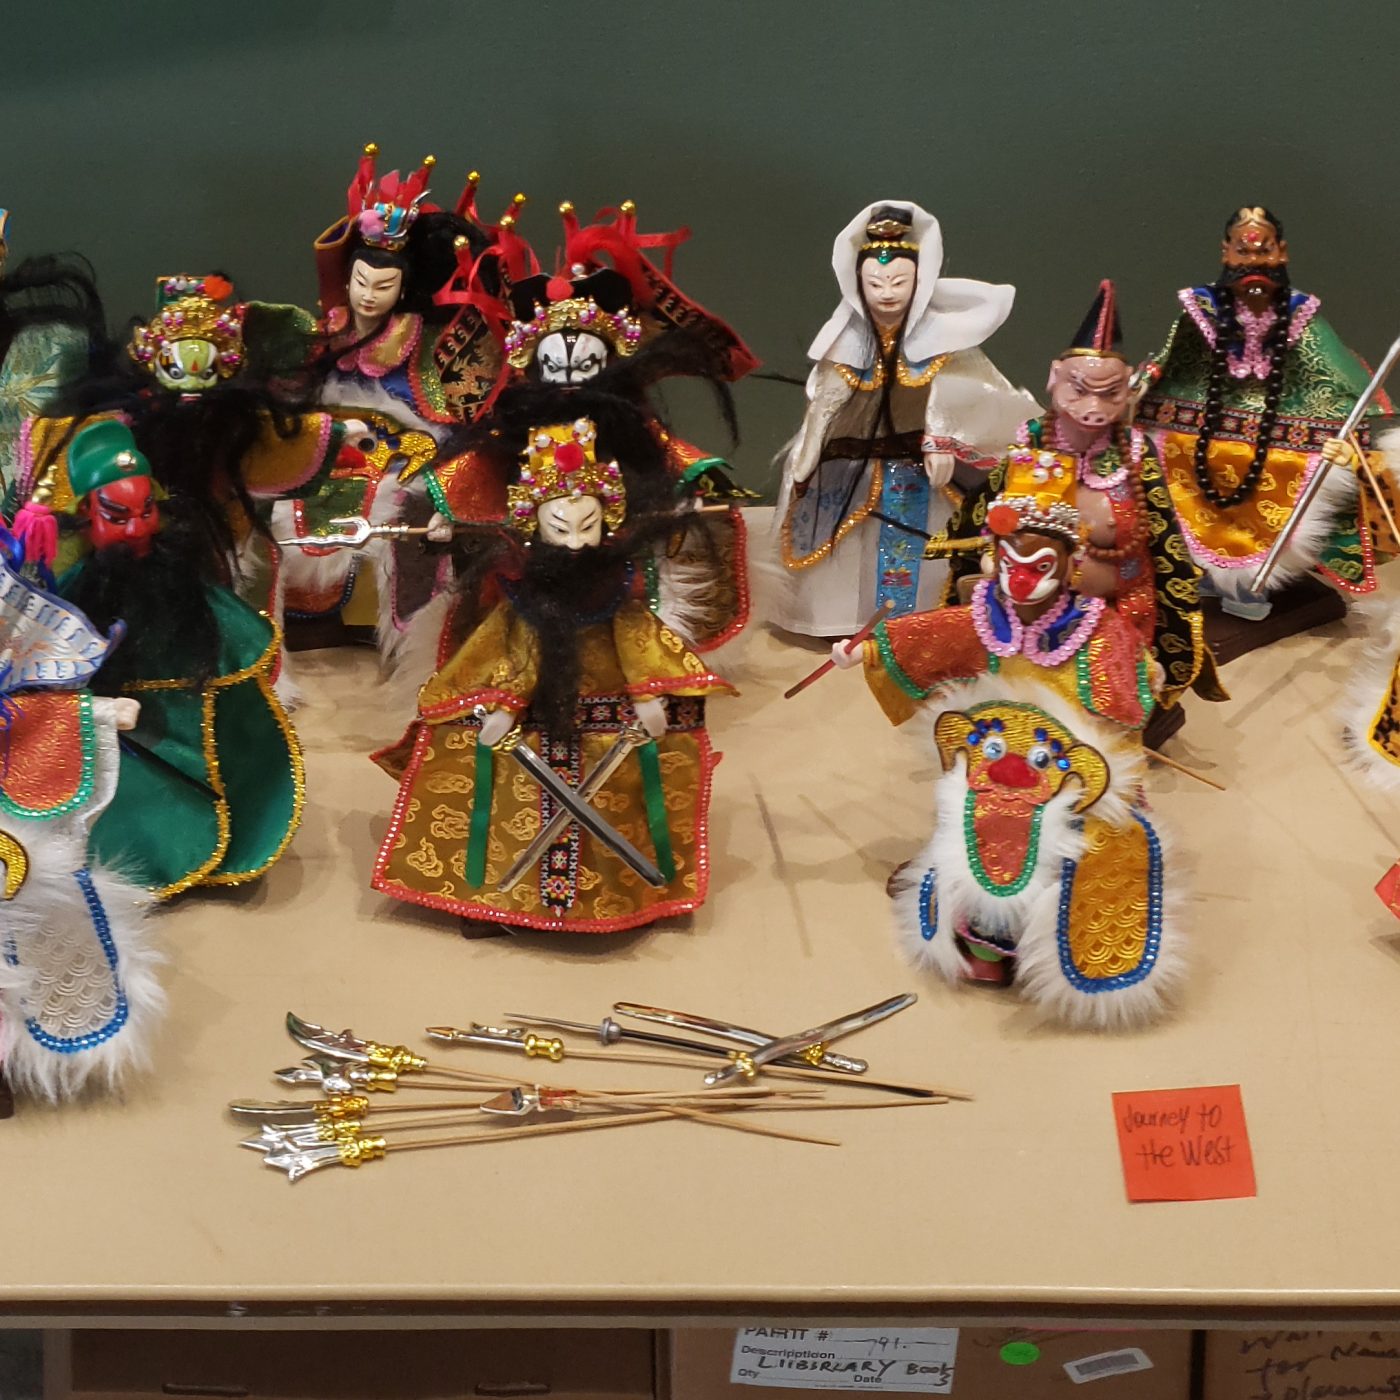 Glove Puppet Collection. Courtesy of Steven Yungyuan Chang, Museum of Chinese in America (MOCA) Collection.